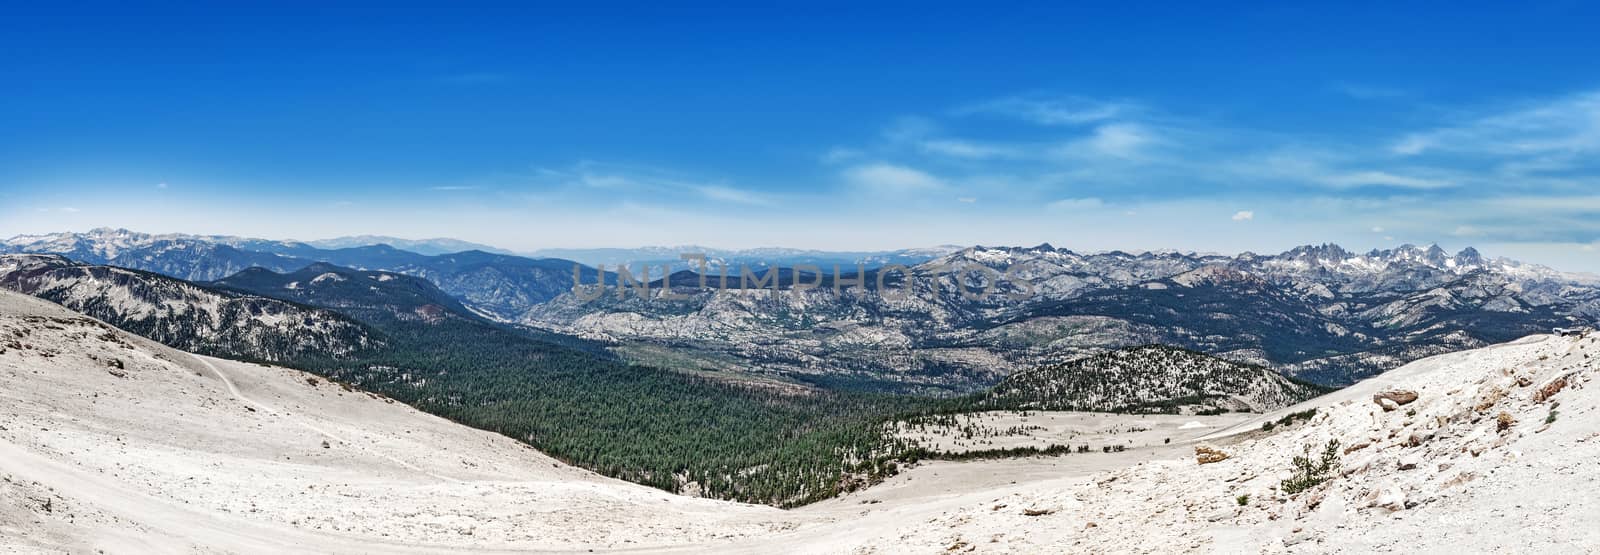 View from Mammoth Mountain in California, in July, with dirty snow in foreground.